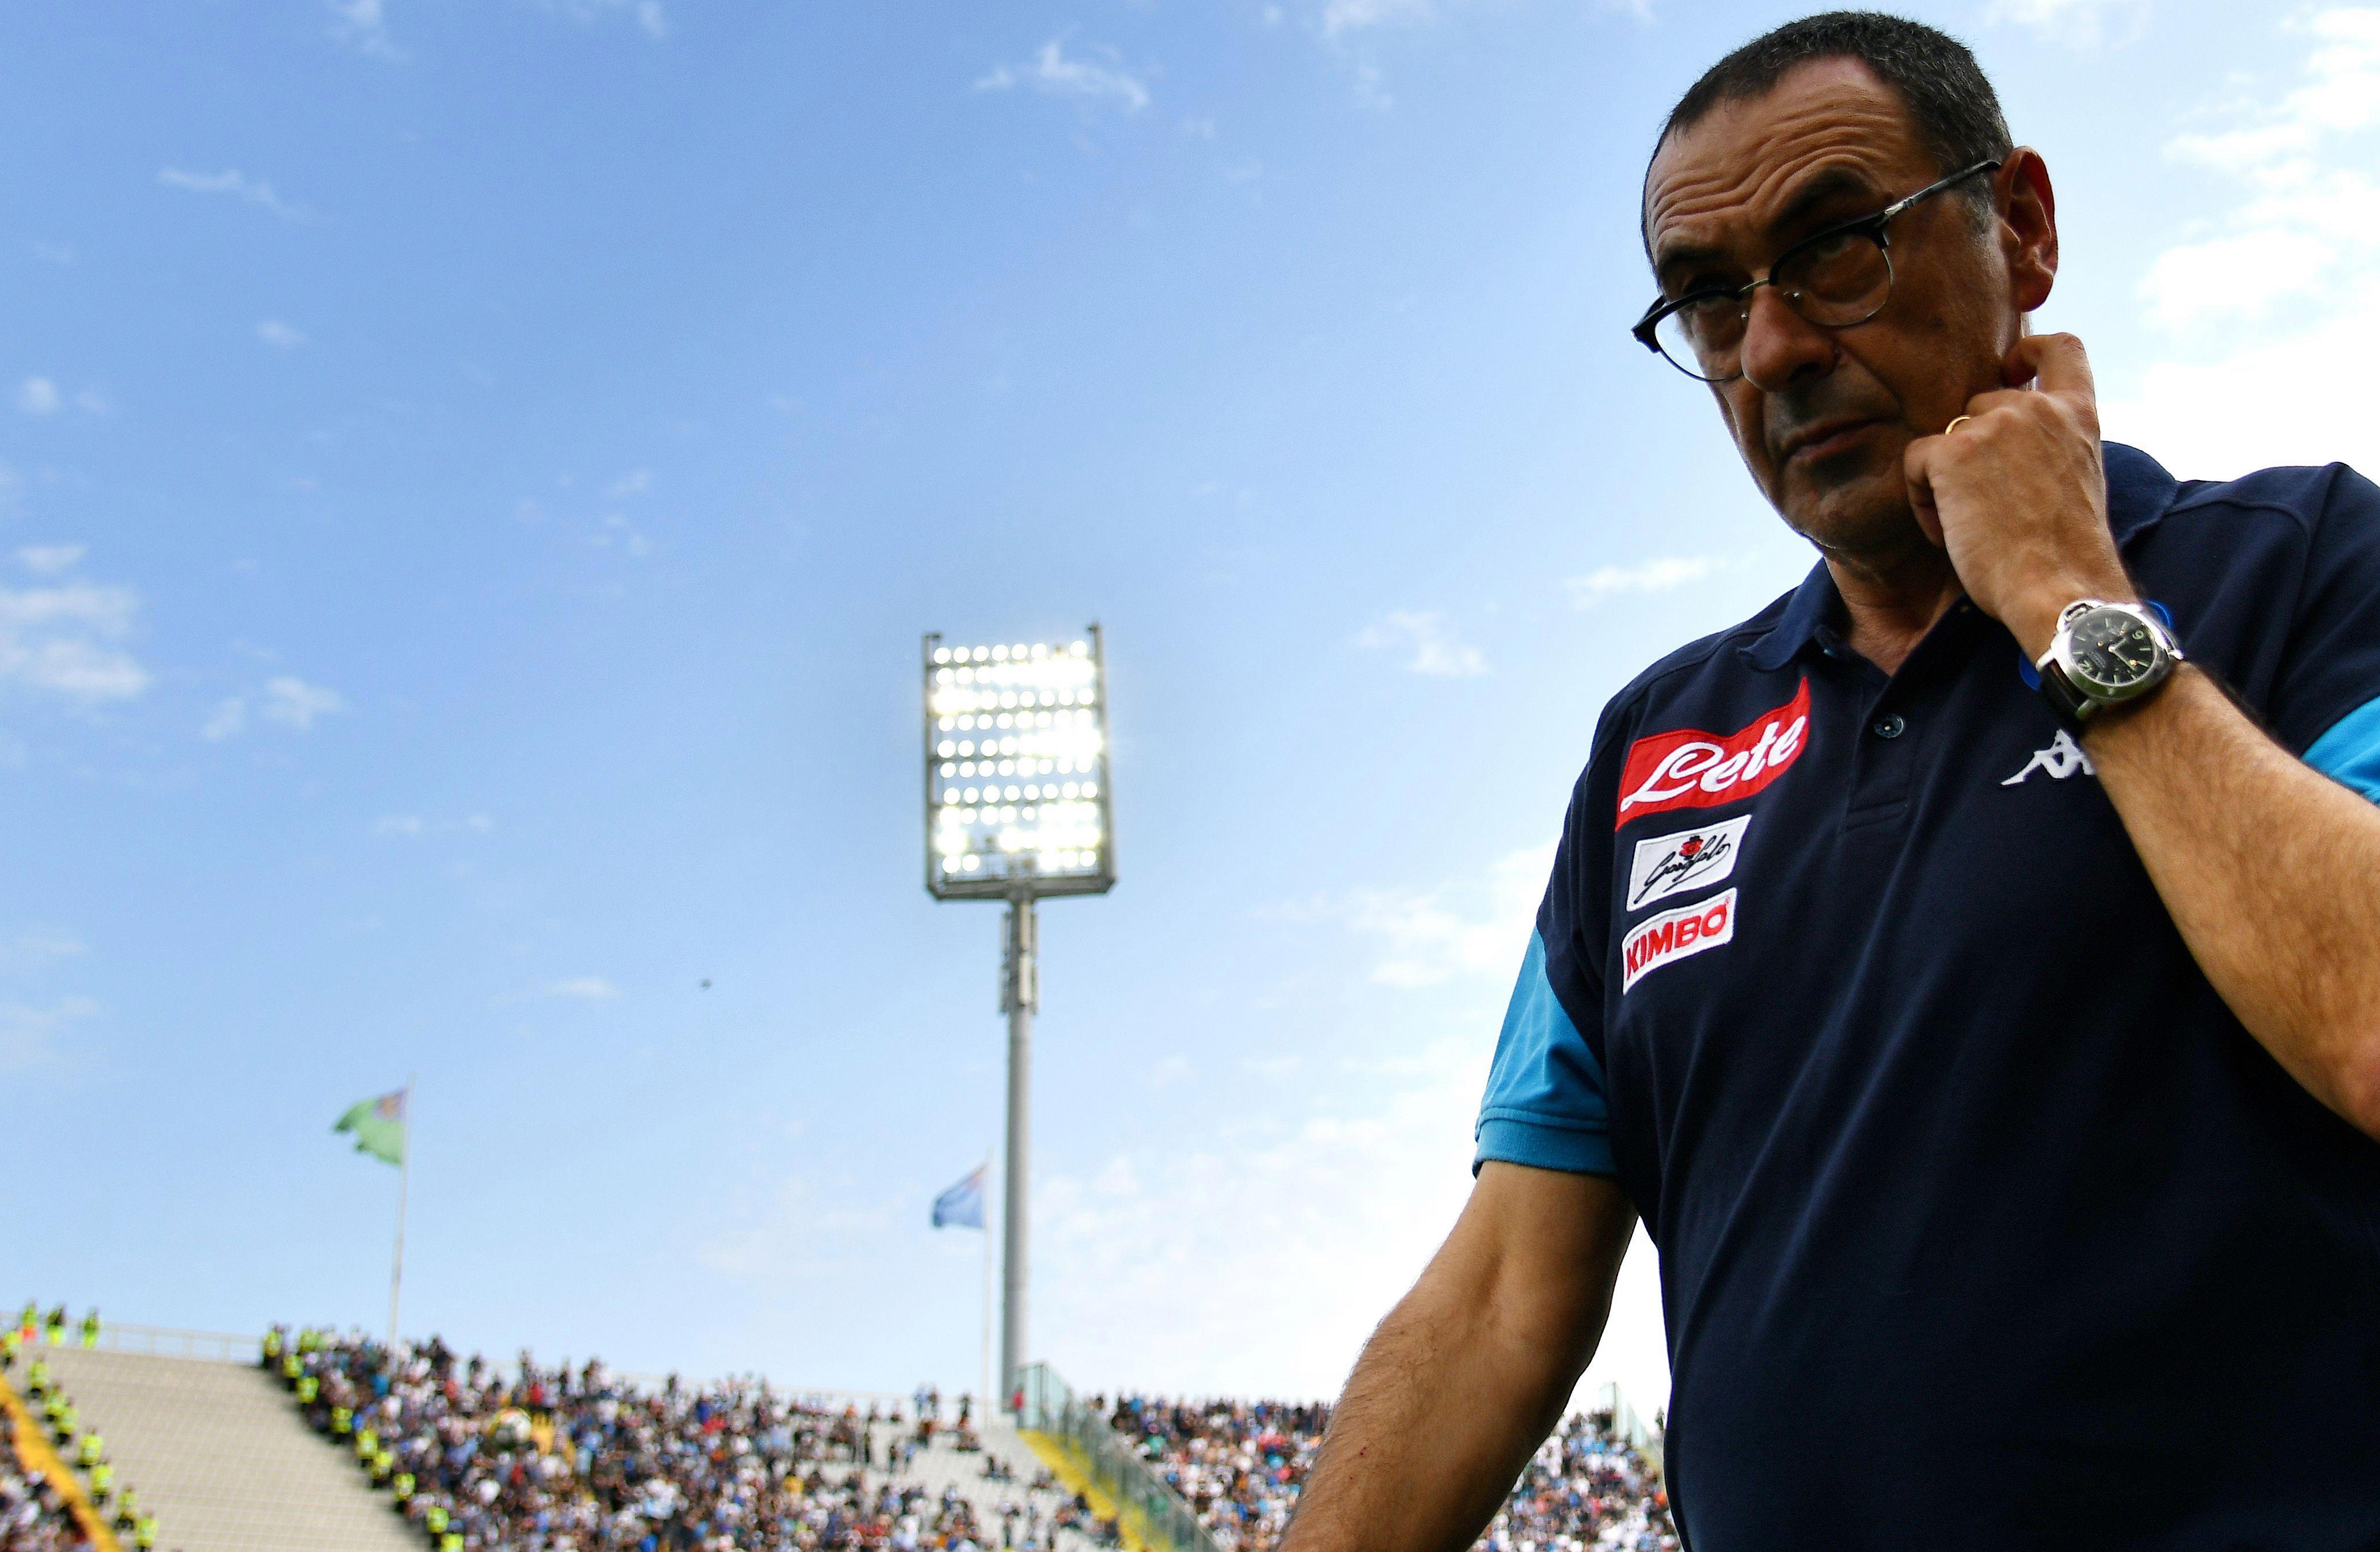 Chelsea ready to appoint Maurizio Sarri as Antonio Conte's Replacement